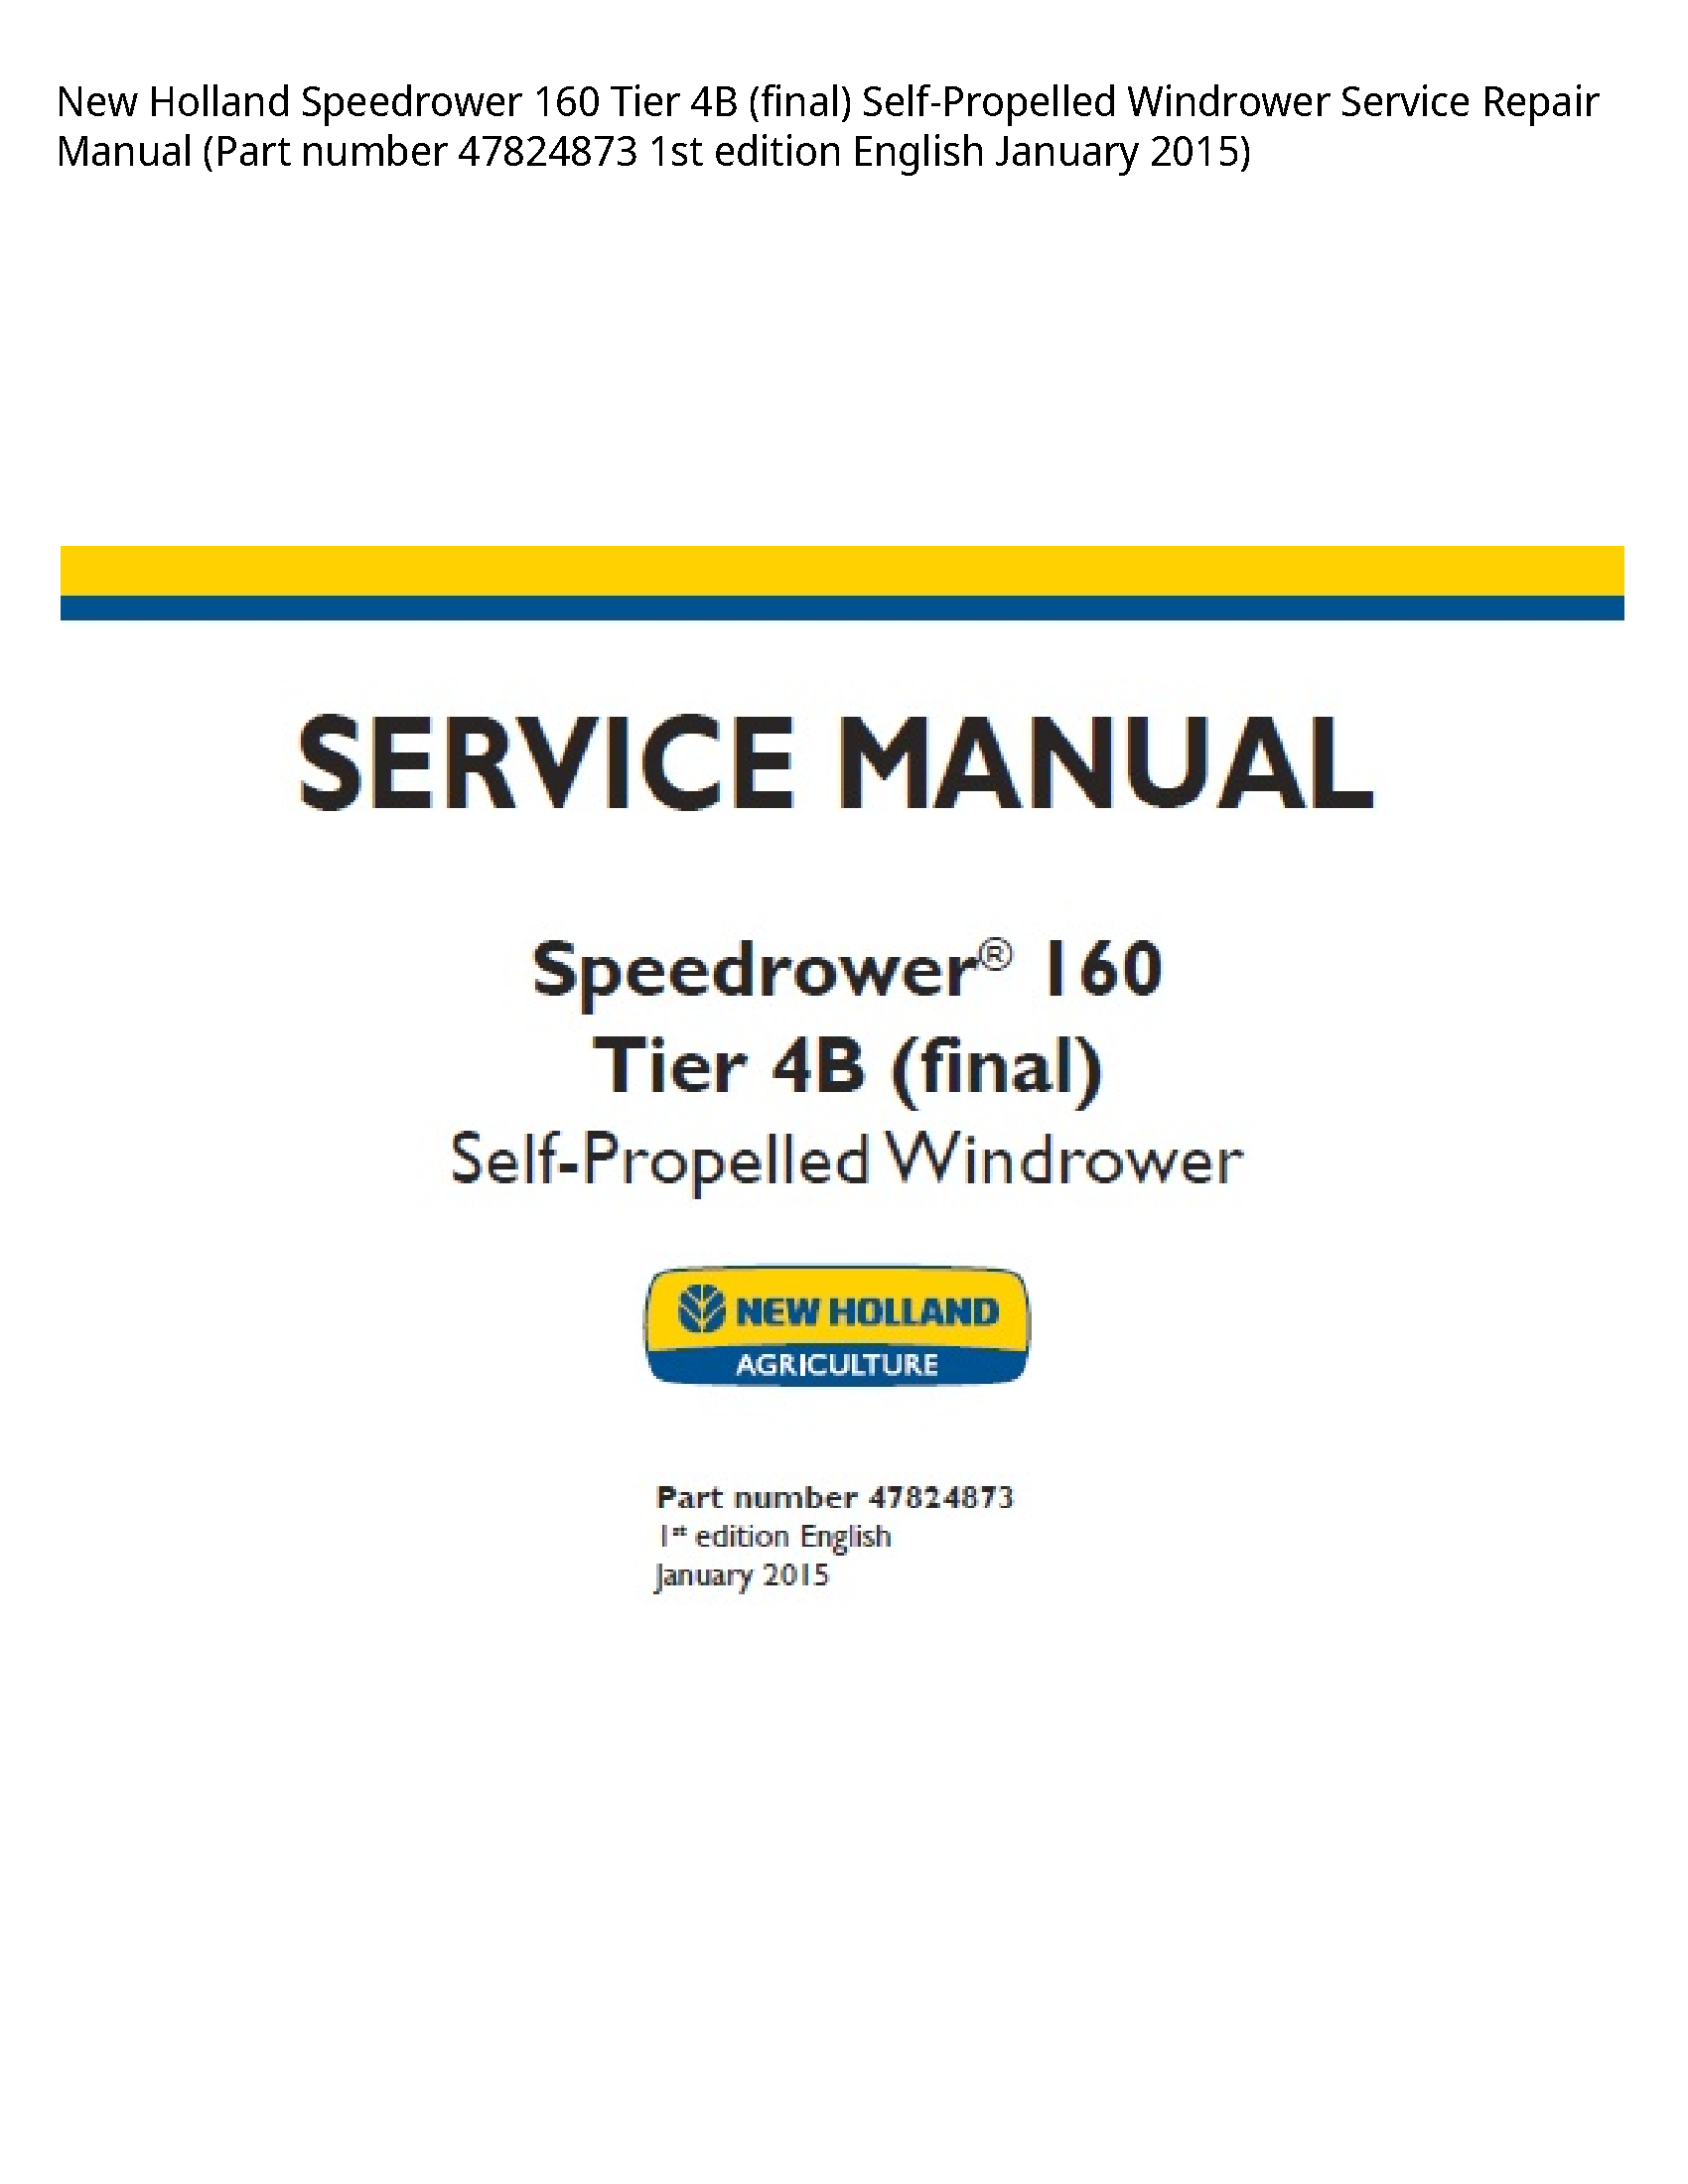 New Holland 160 Speedrower Tier (final) Self-Propelled Windrower manual